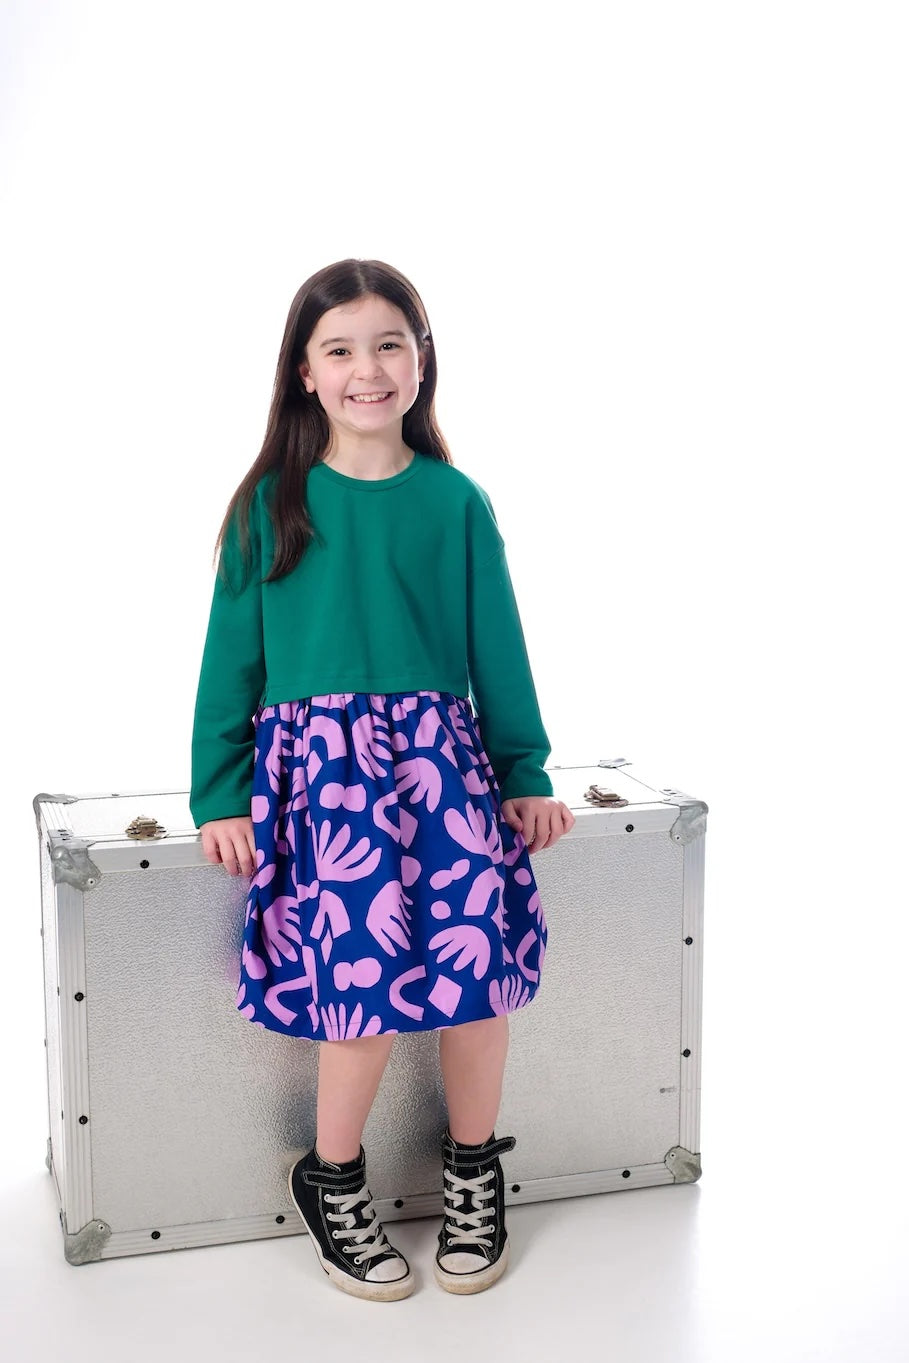 Girl wearing the Child/Teen Mizzle Dress sewing pattern from Little Rosy Cheeks on The Fold Line. A dress pattern made in knit fabric for the top and woven fabric for the skirt, featuring an oversized fit, round neck, long sleeves, gathered skirt, and poc